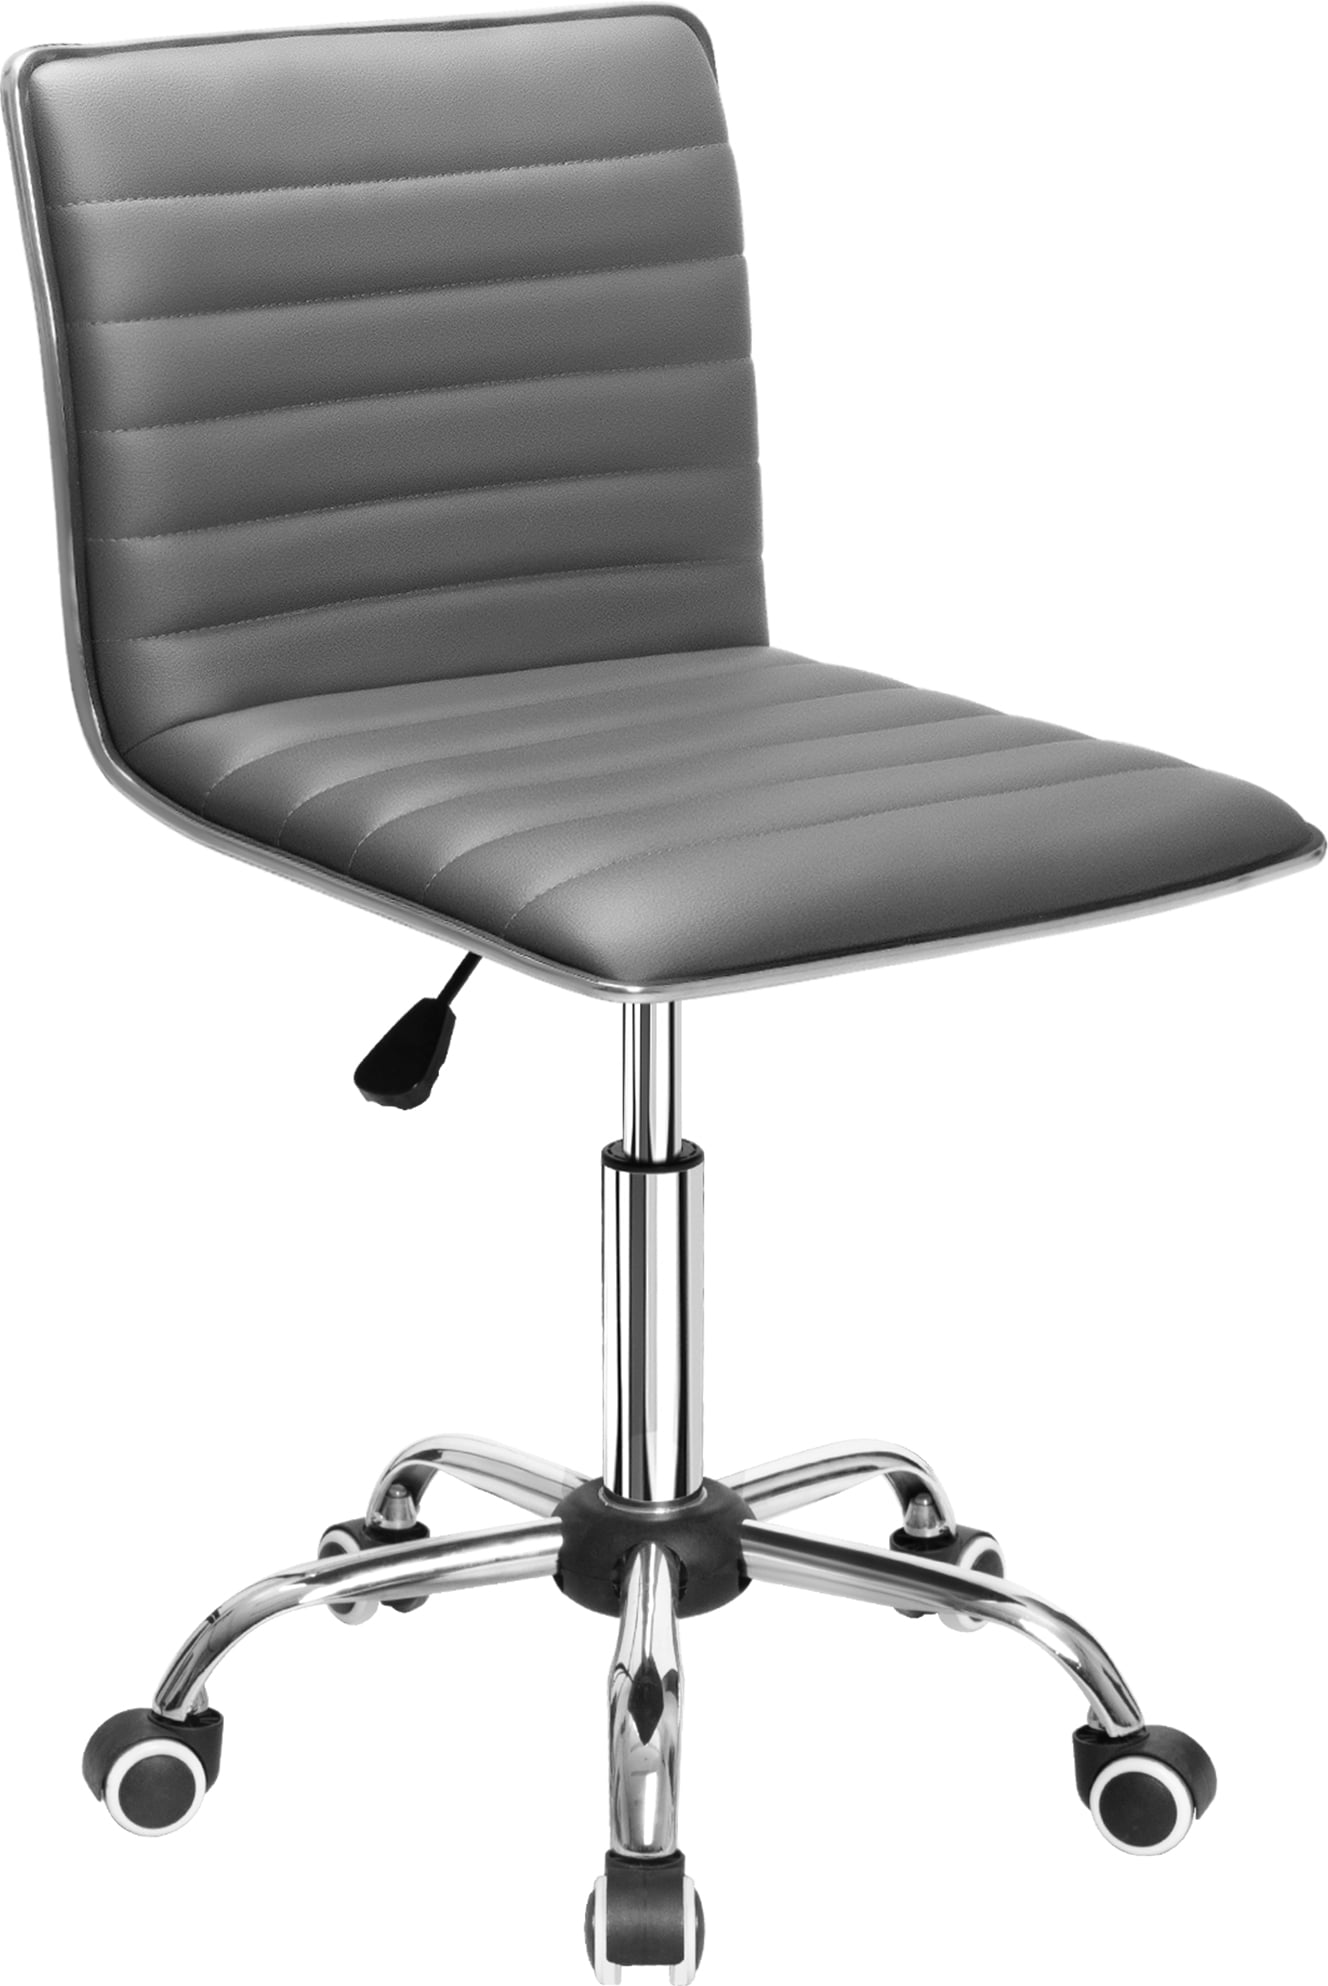 Furmax Mid Back Faux Leather Office Desk Computer Task Chair, with